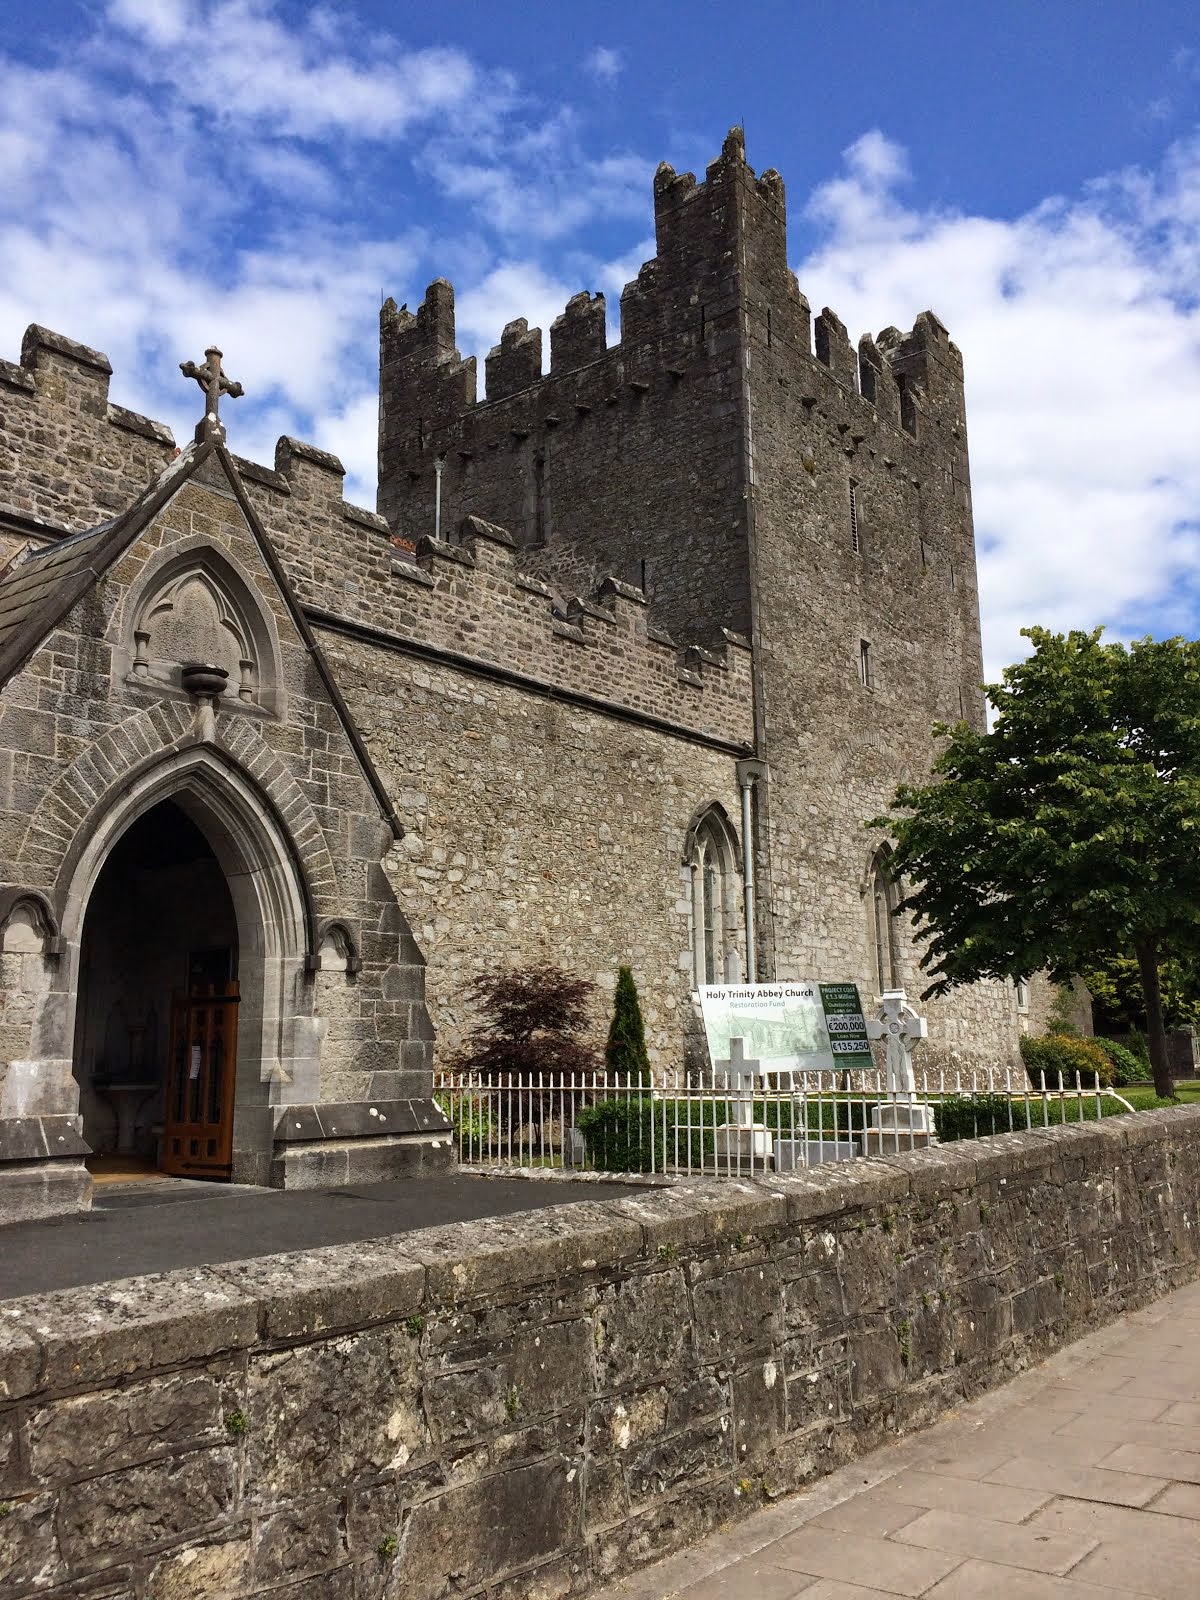 Adare Castle, which is now part of the Holy Trinity Chruch